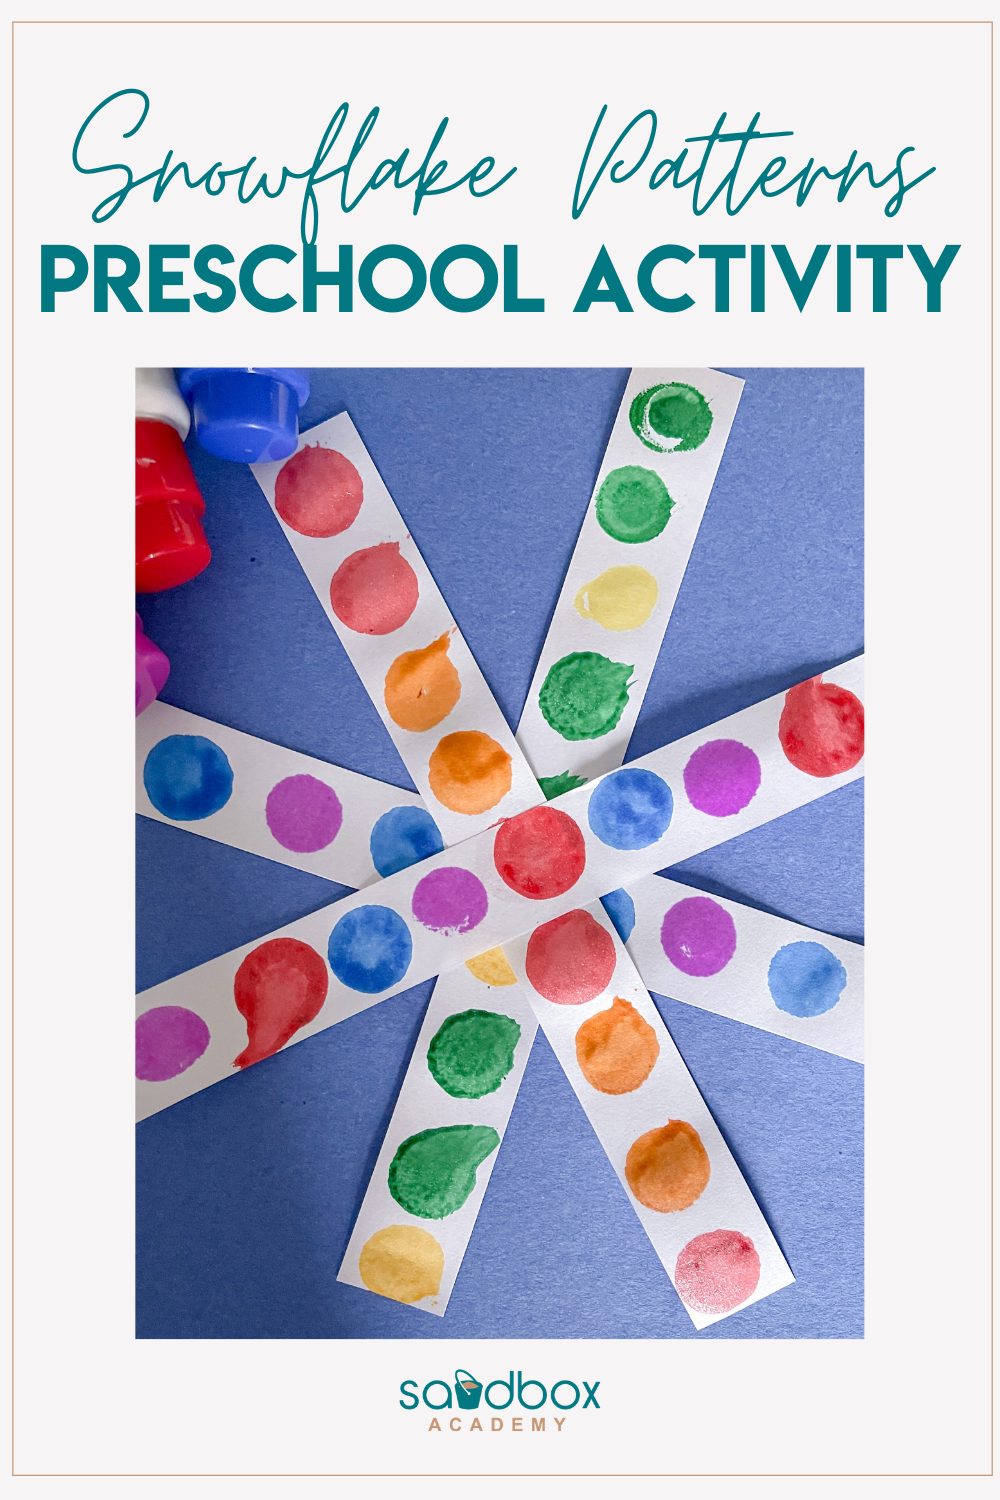 paper snowflake with colorful dots in a pattern text reads snowflake patterns preschool activity